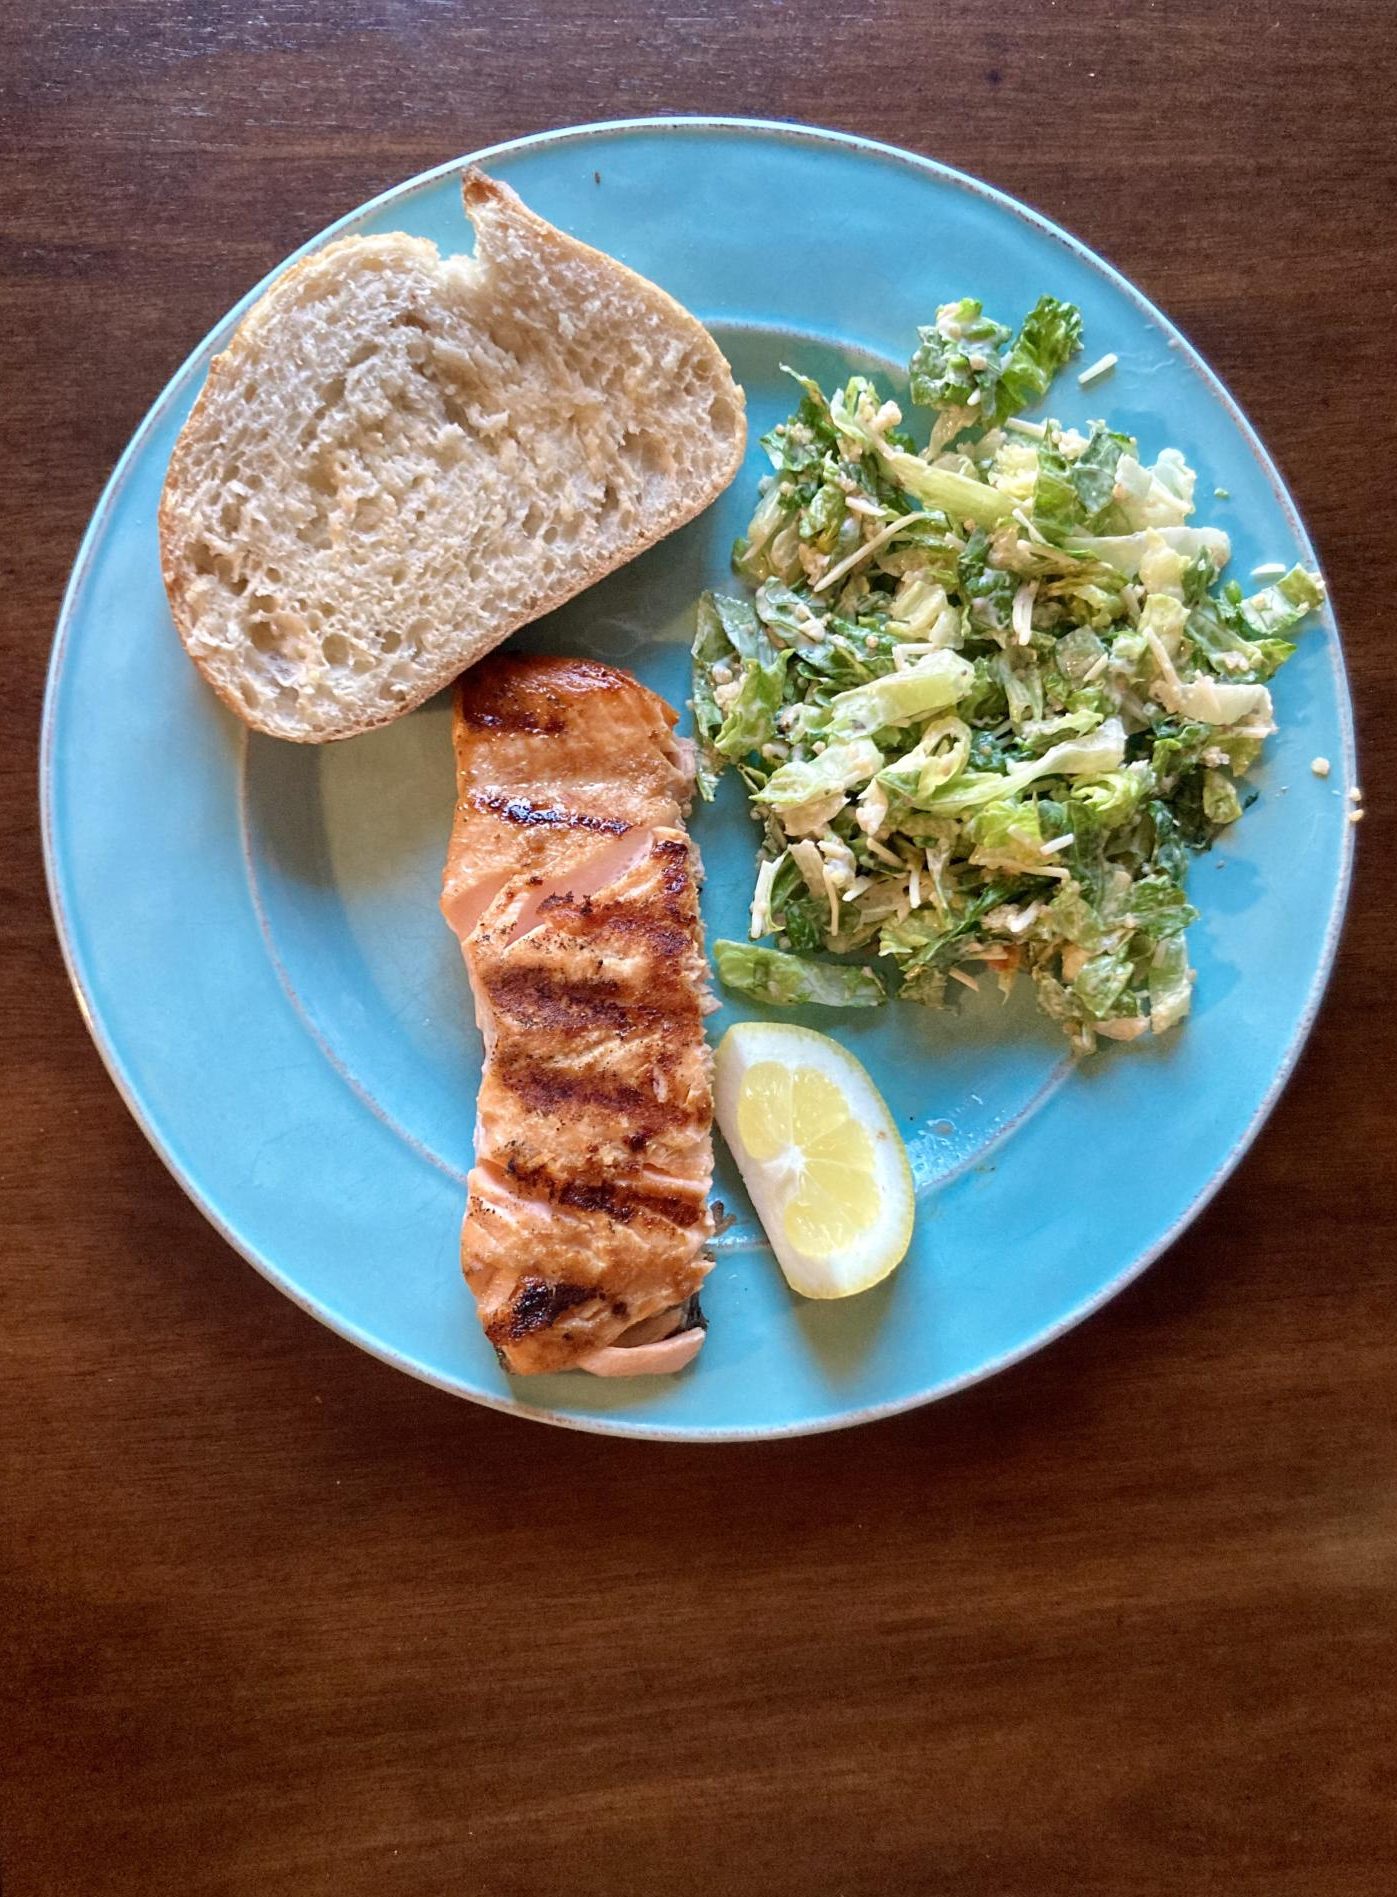 Grilled salmon with Caesar salad and bread.